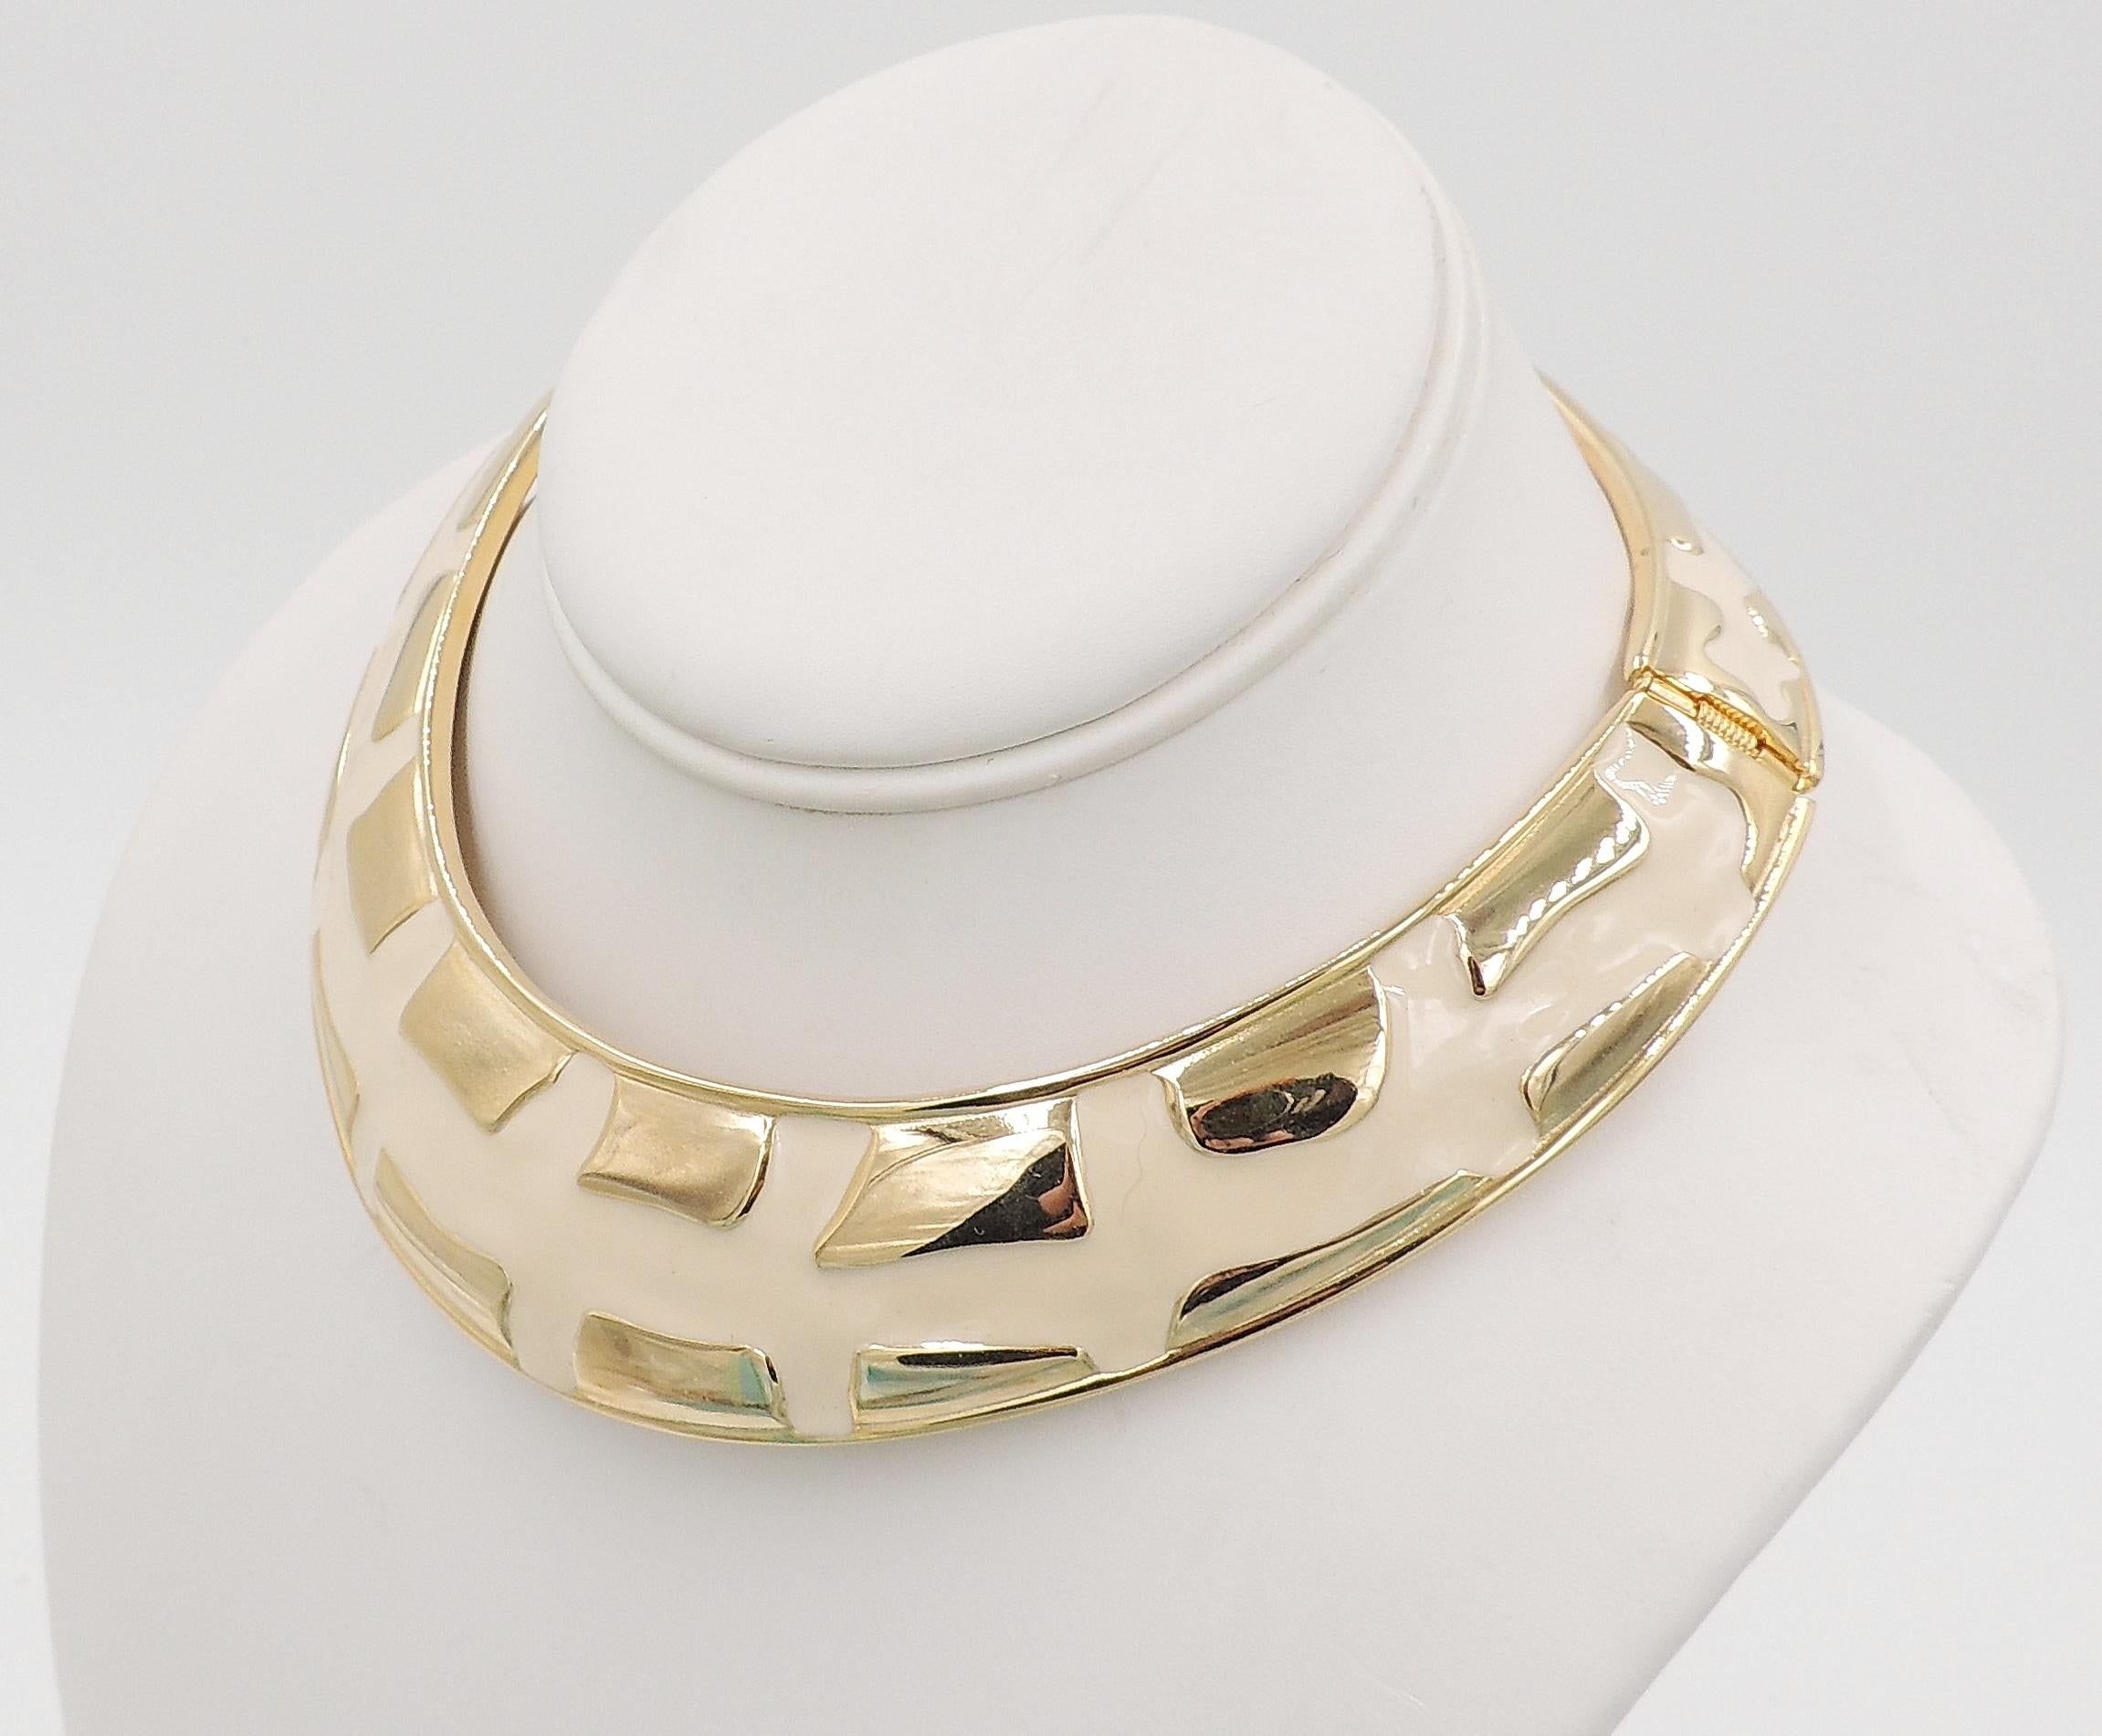 Vintage 1980s Signed Valentino Modernist White Enamel Collar Necklace In Excellent Condition For Sale In Easton, PA